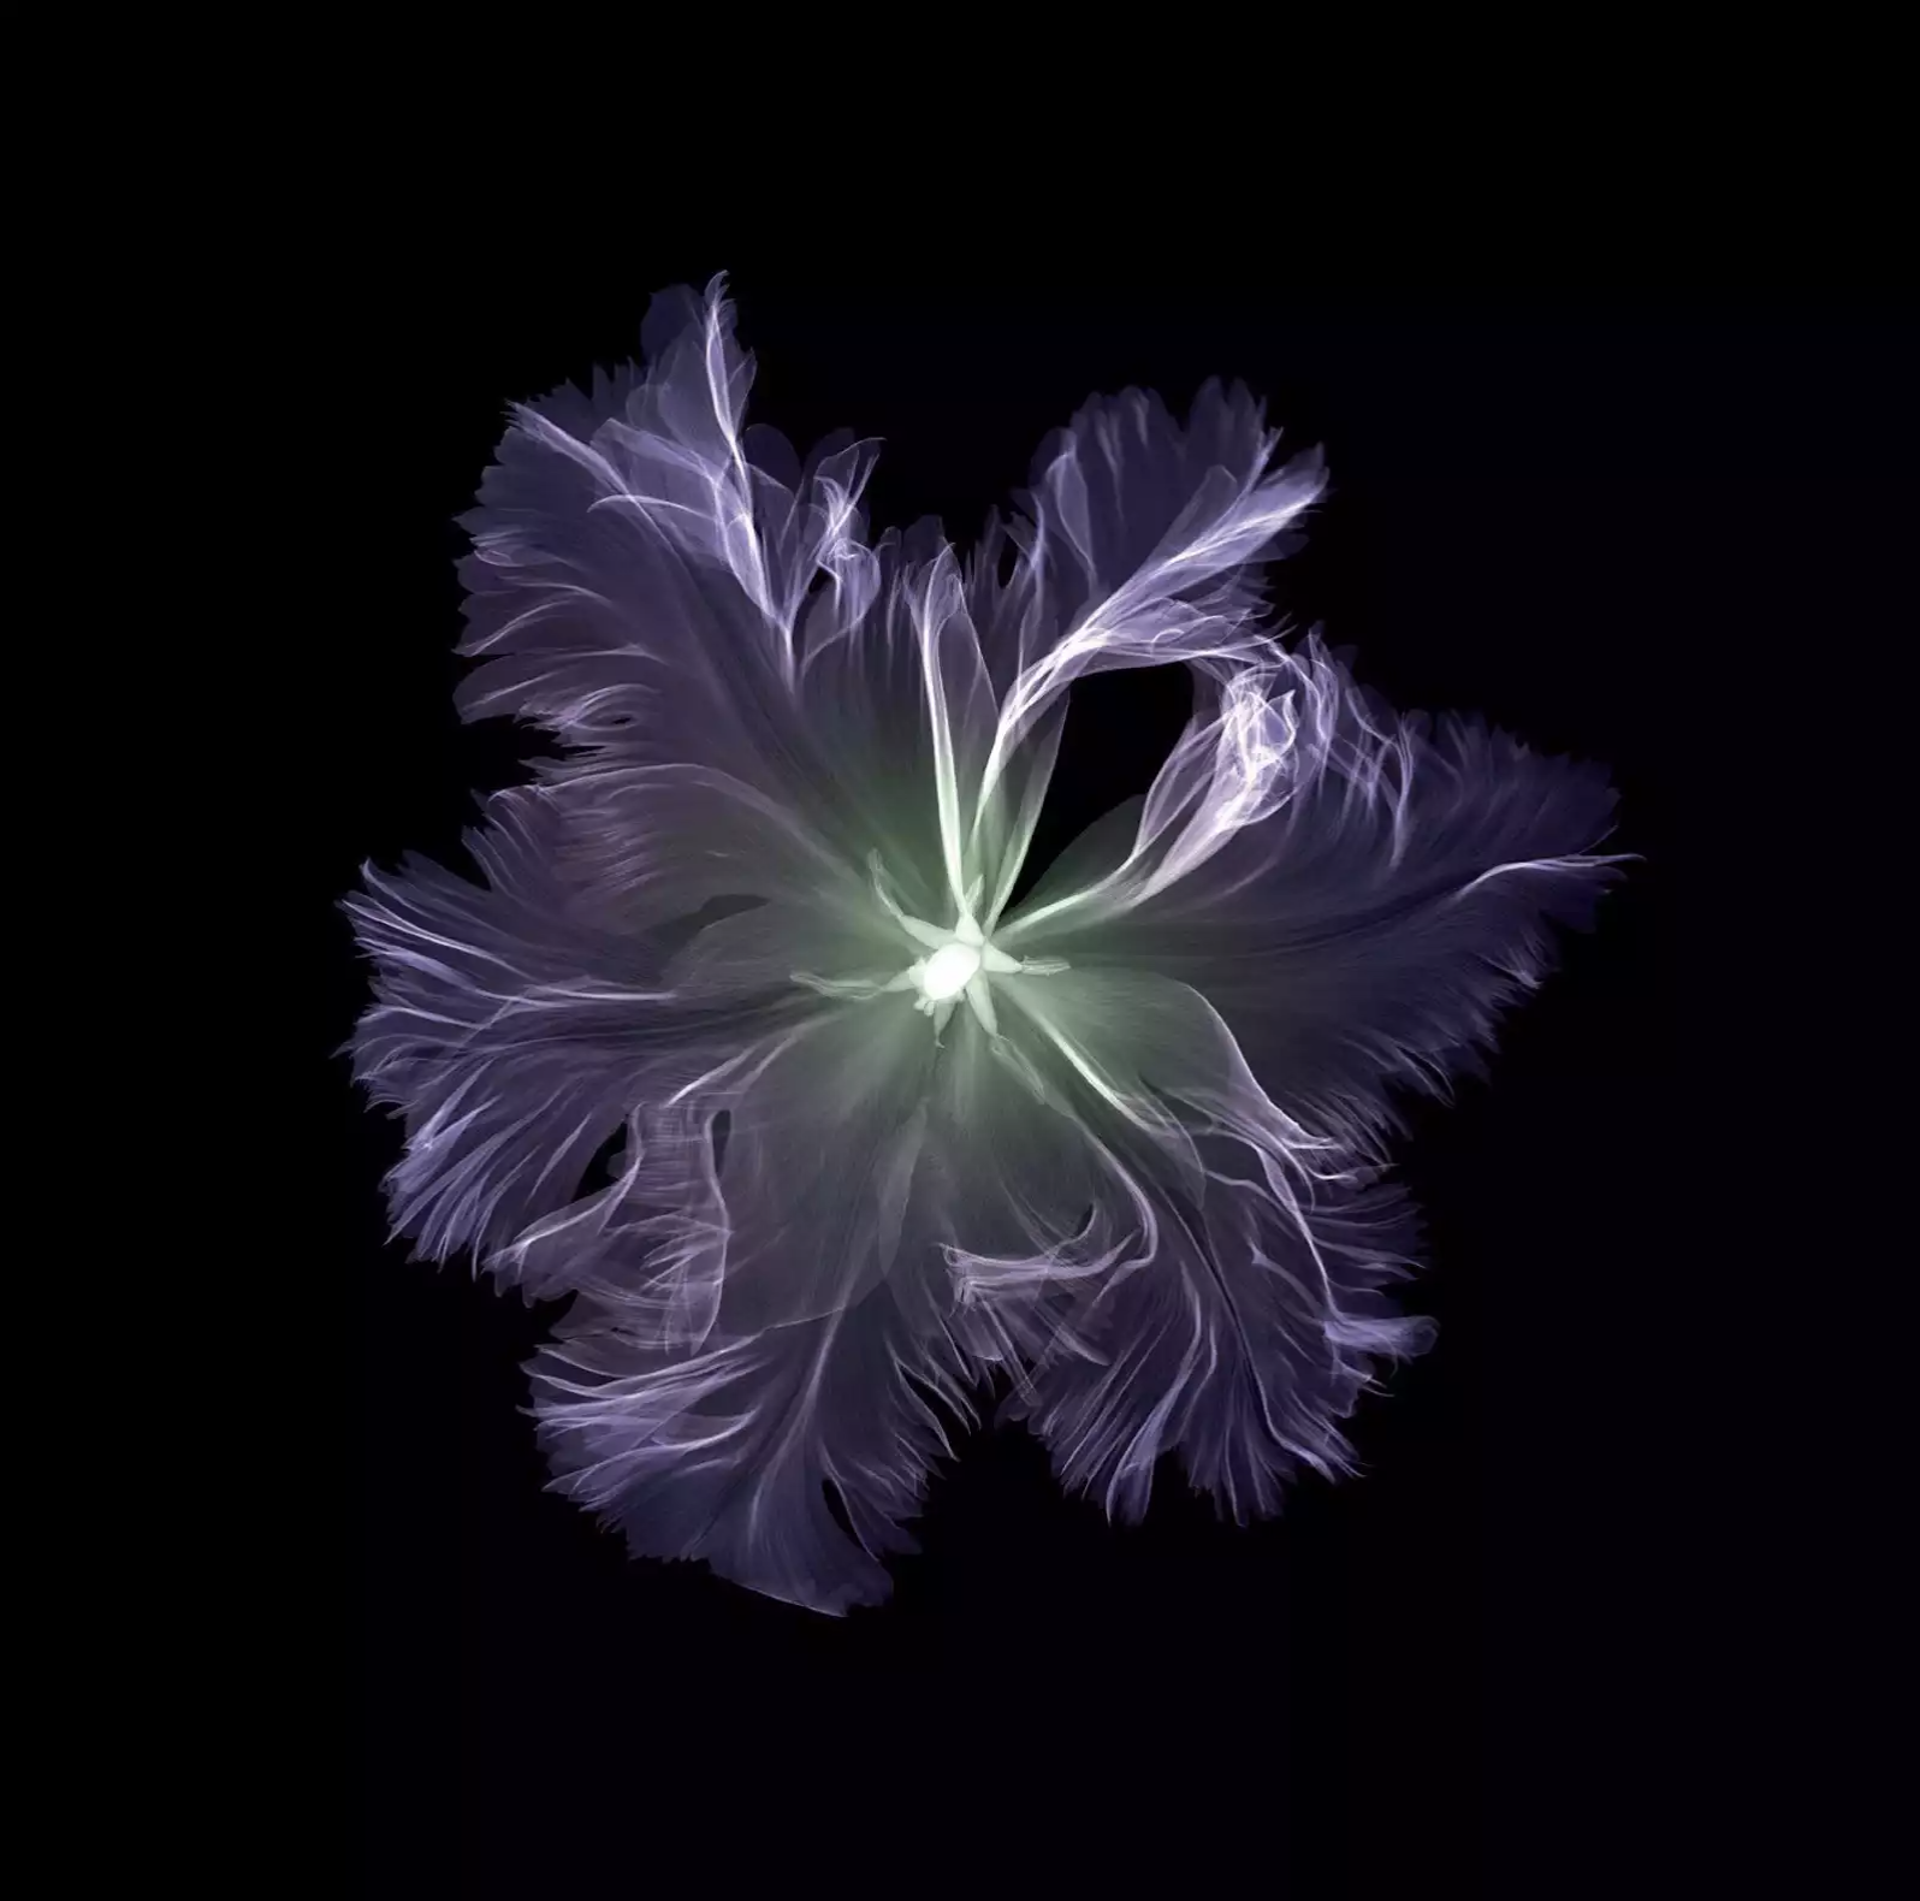 Parrot Tulip by Nick Veasey